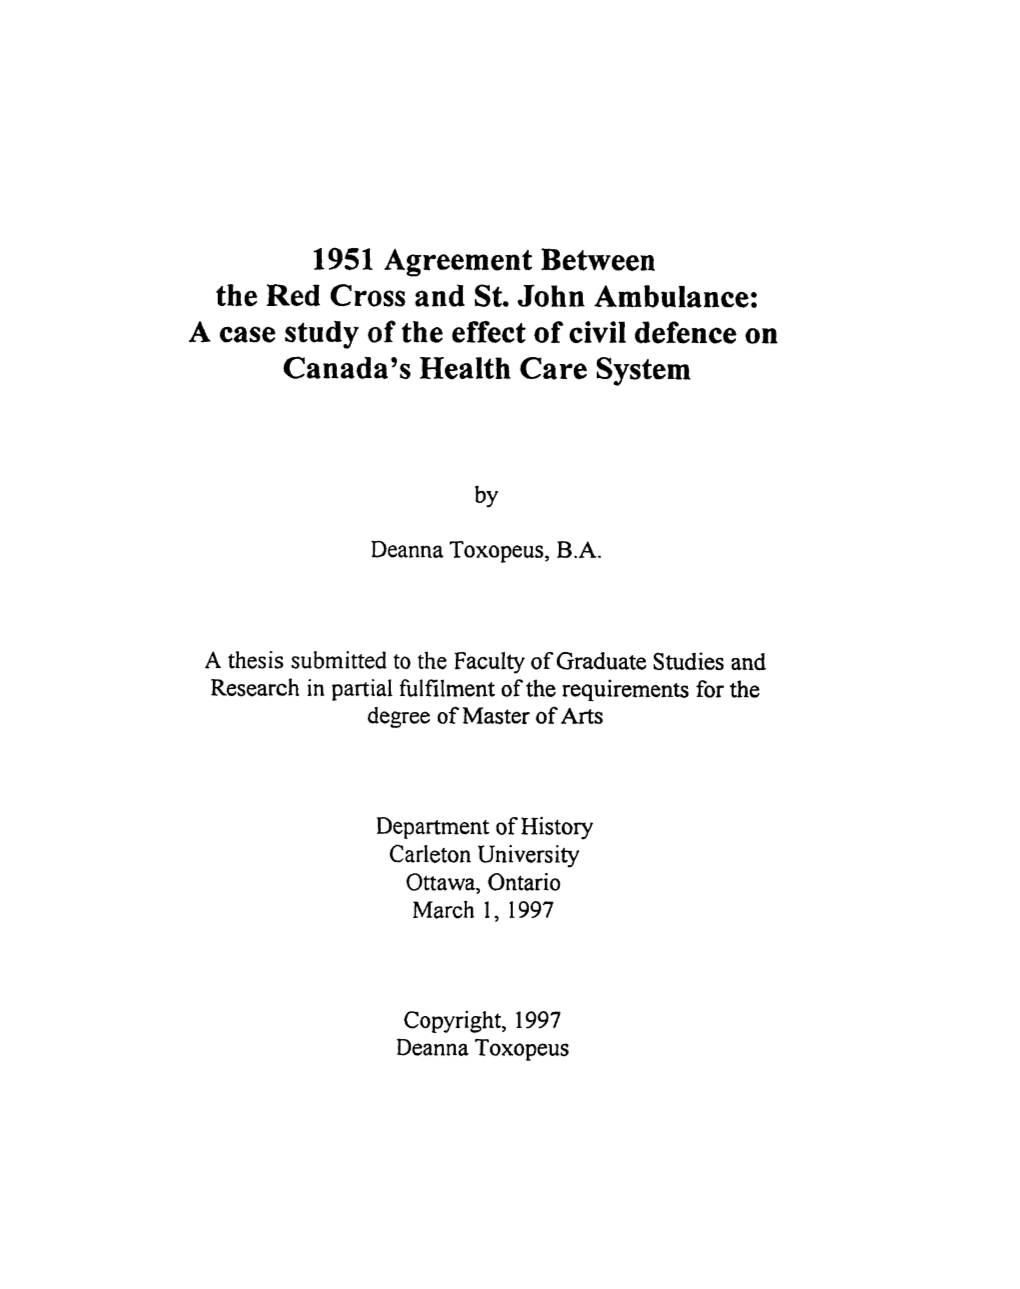 1951 Agreement Between the Red Cross and St. John Ambulance: a Case Study of the Effect of Civil Defence on Canada's Health Care System